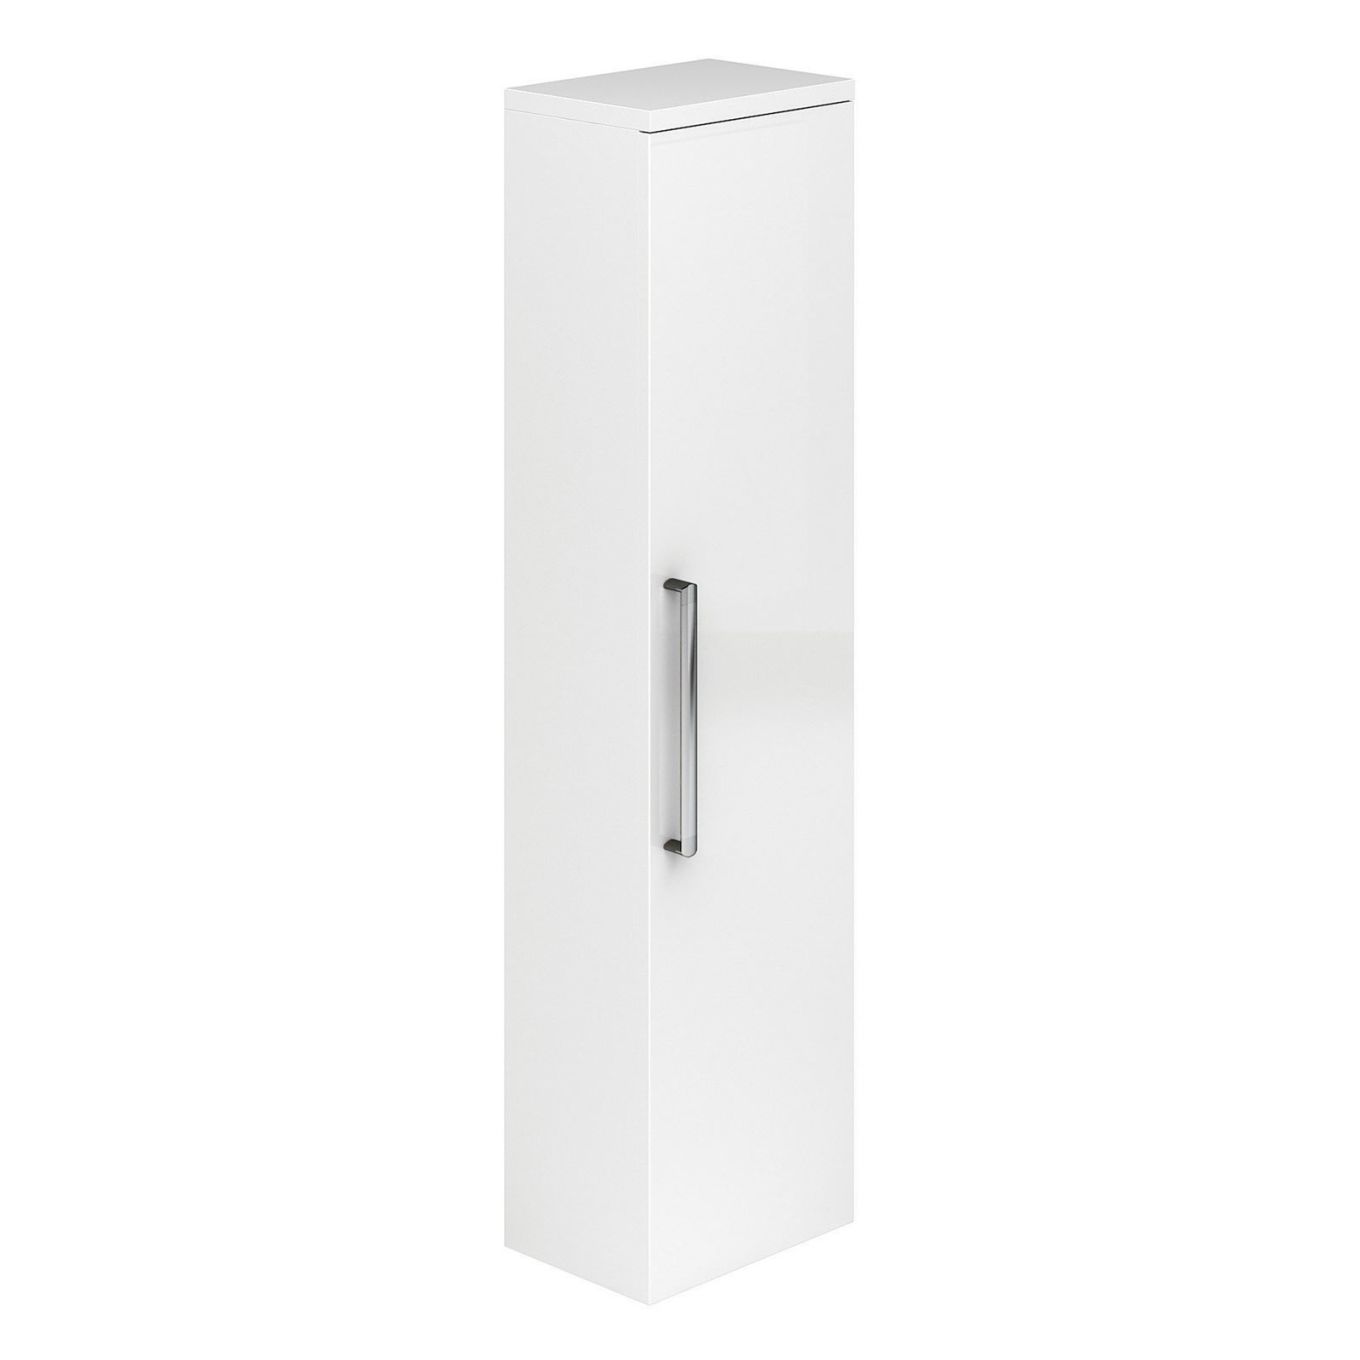 Wall Mounted Tall Storage Unit in Gloss White